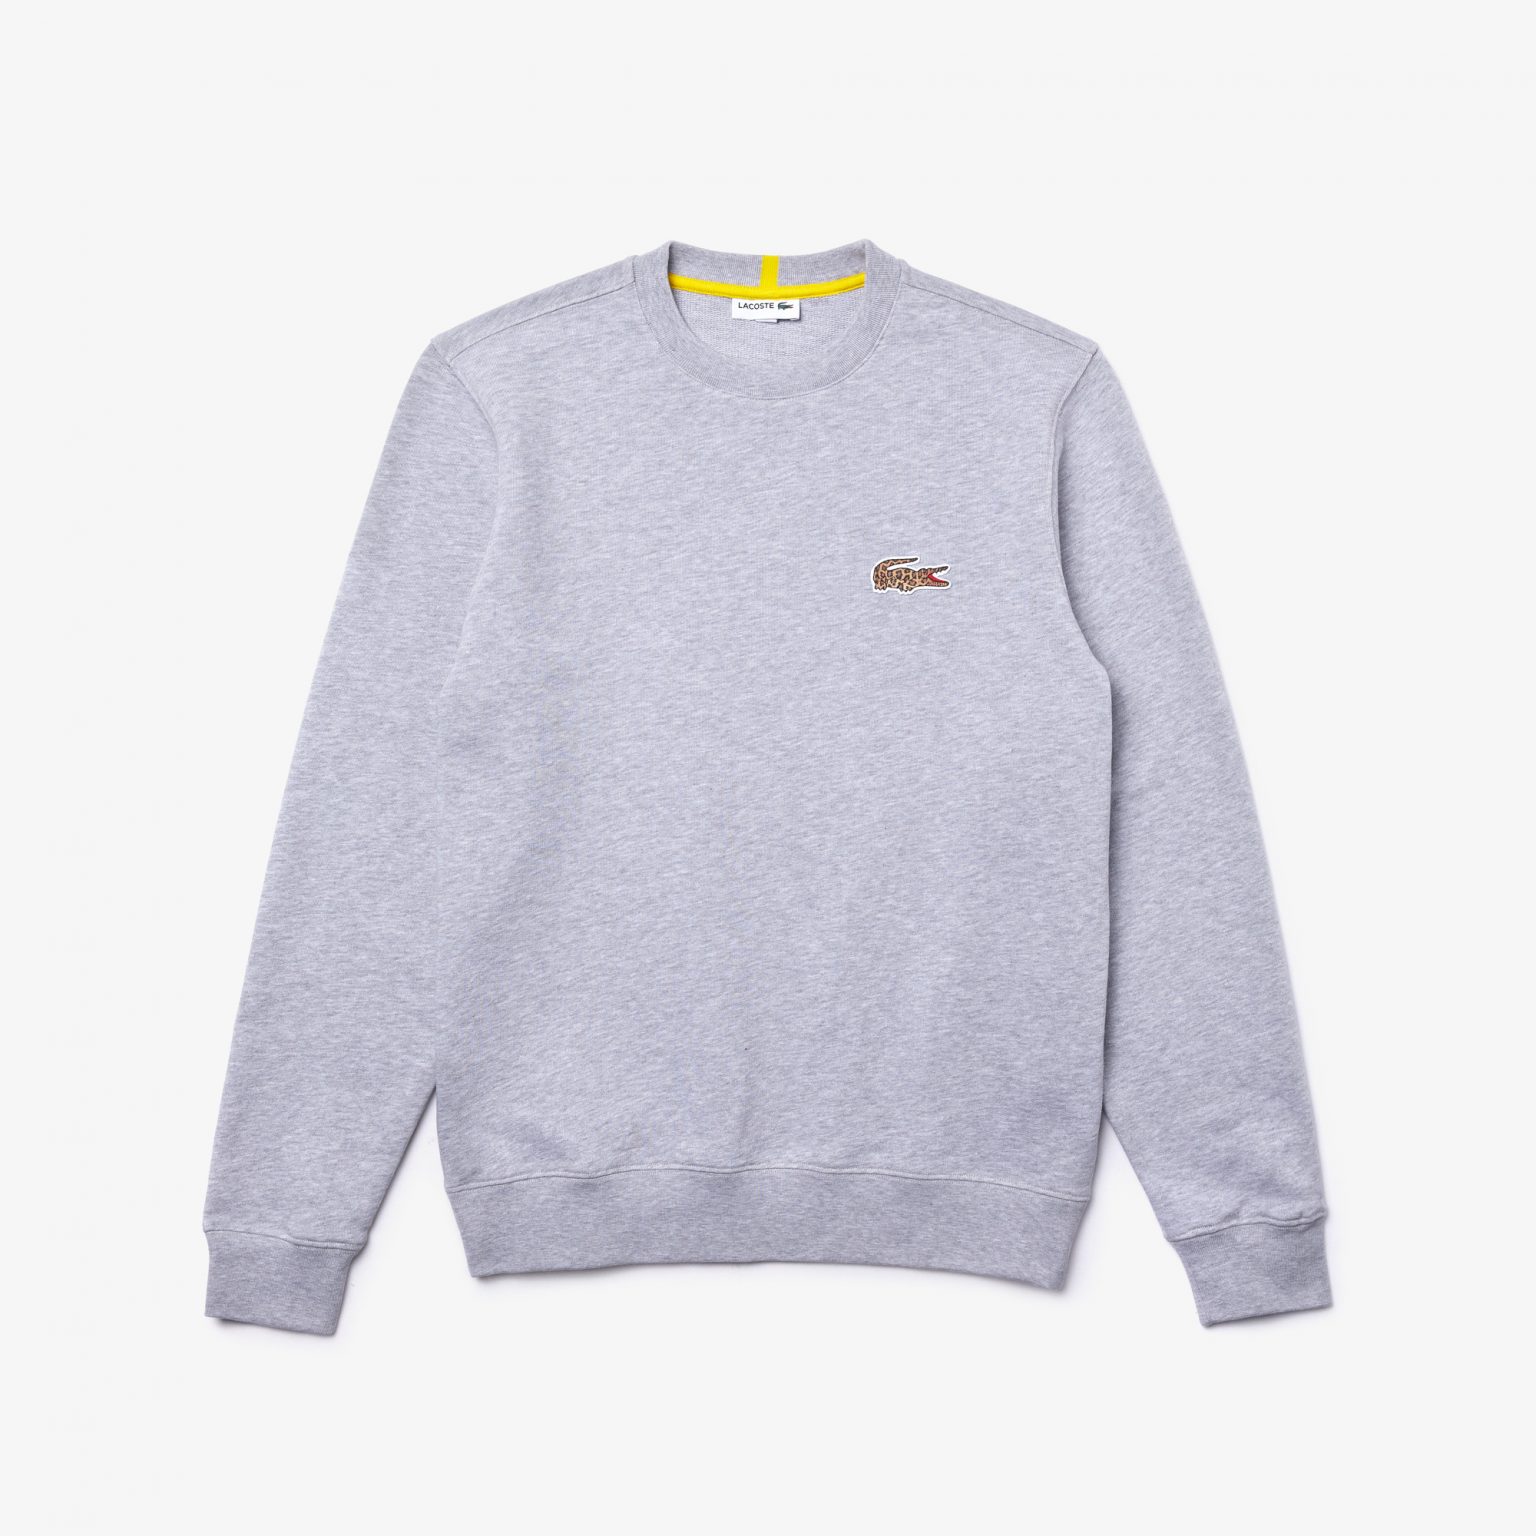 Lacoste x National Geographic Organic Cotton Sweatshirt - Open to All